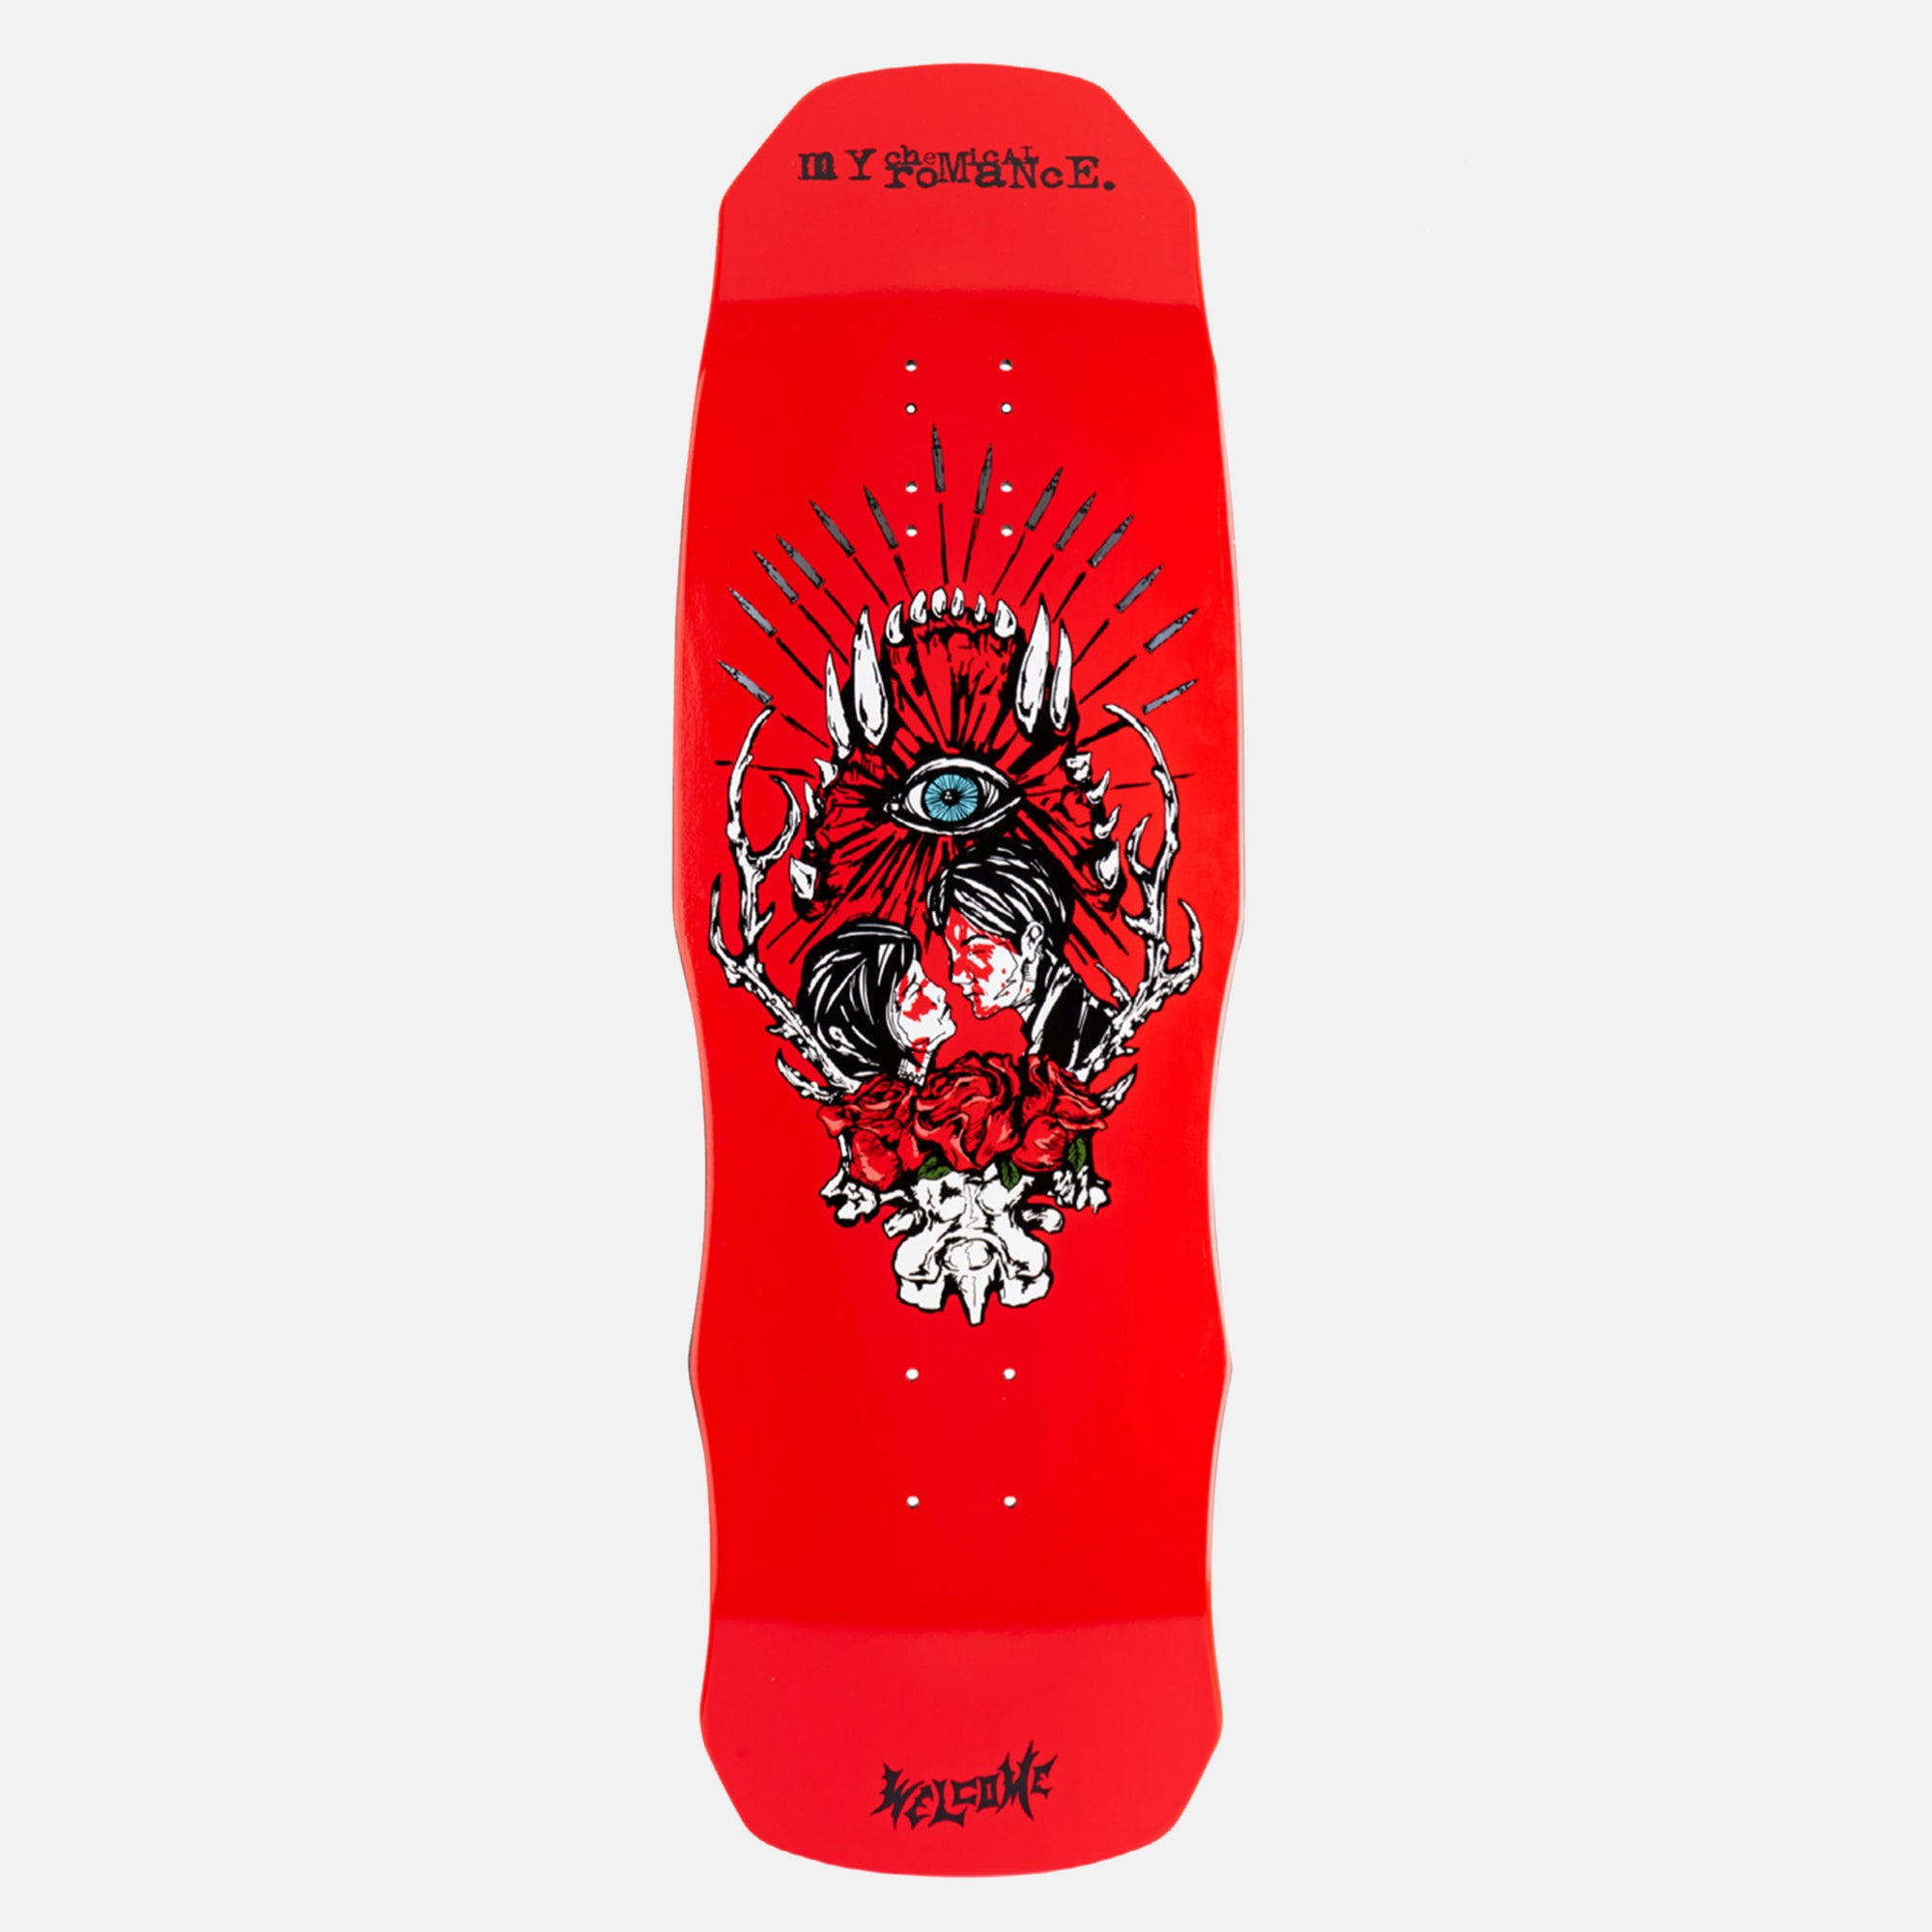 Welcome Skateboards - 9.75" My Chemical Romance Three Cheers Skateboard Deck - Red